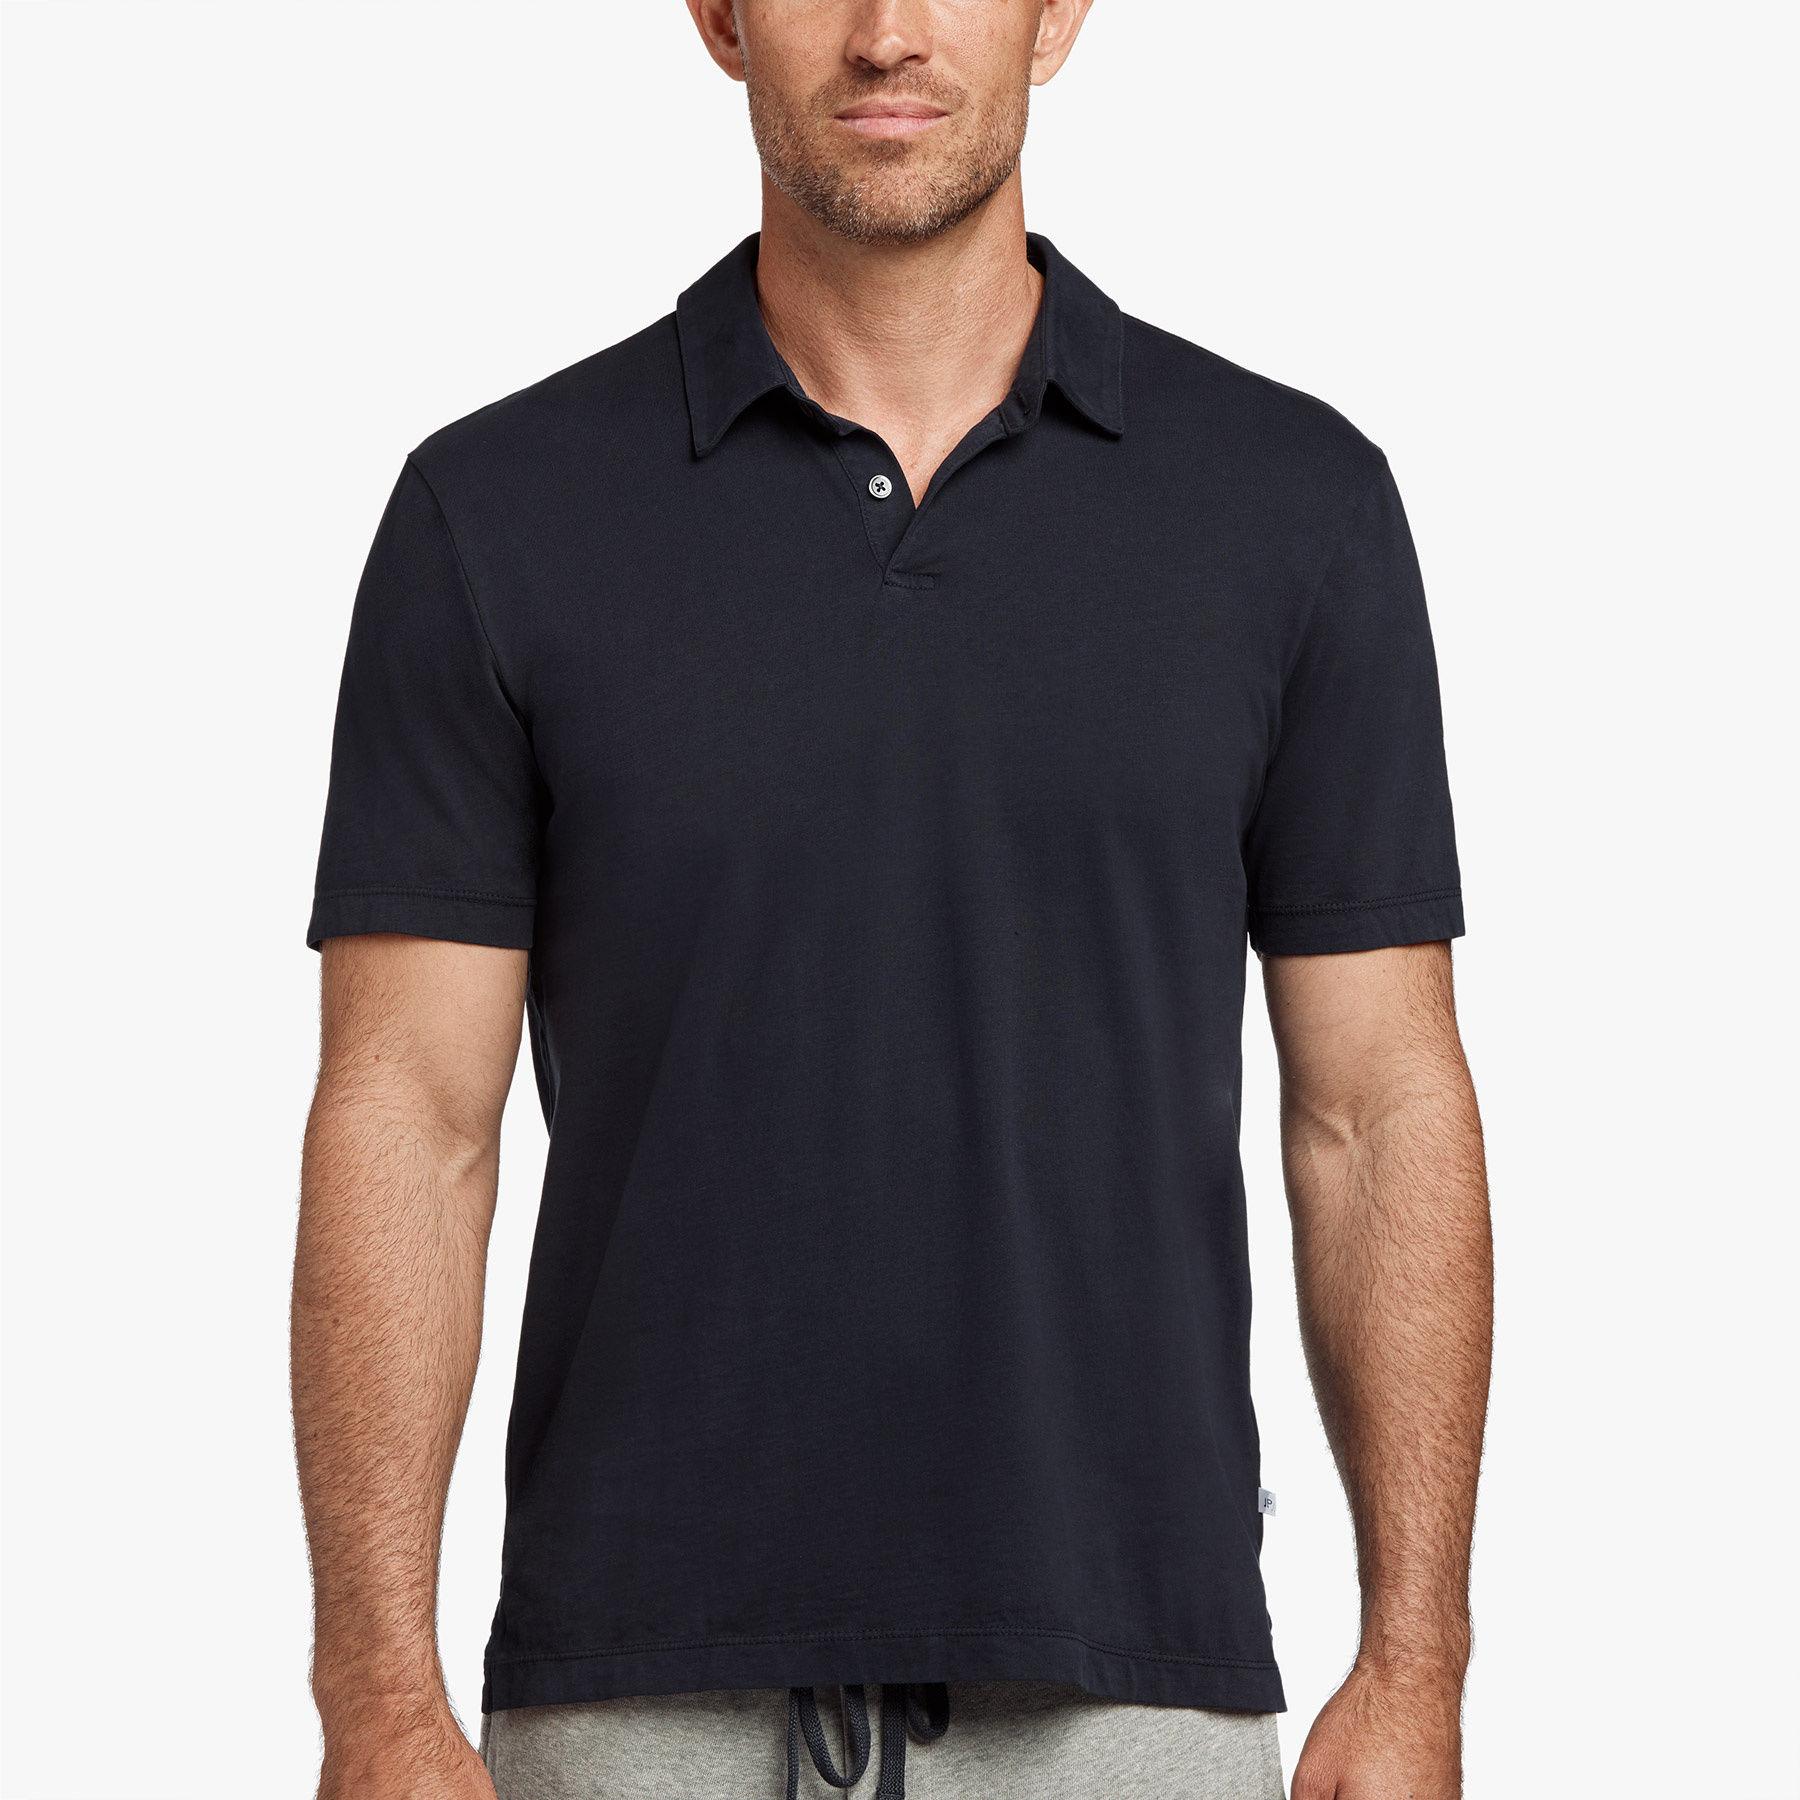 James Perse Sueded Jersey Polo in Deep (Blue) for Men - Lyst